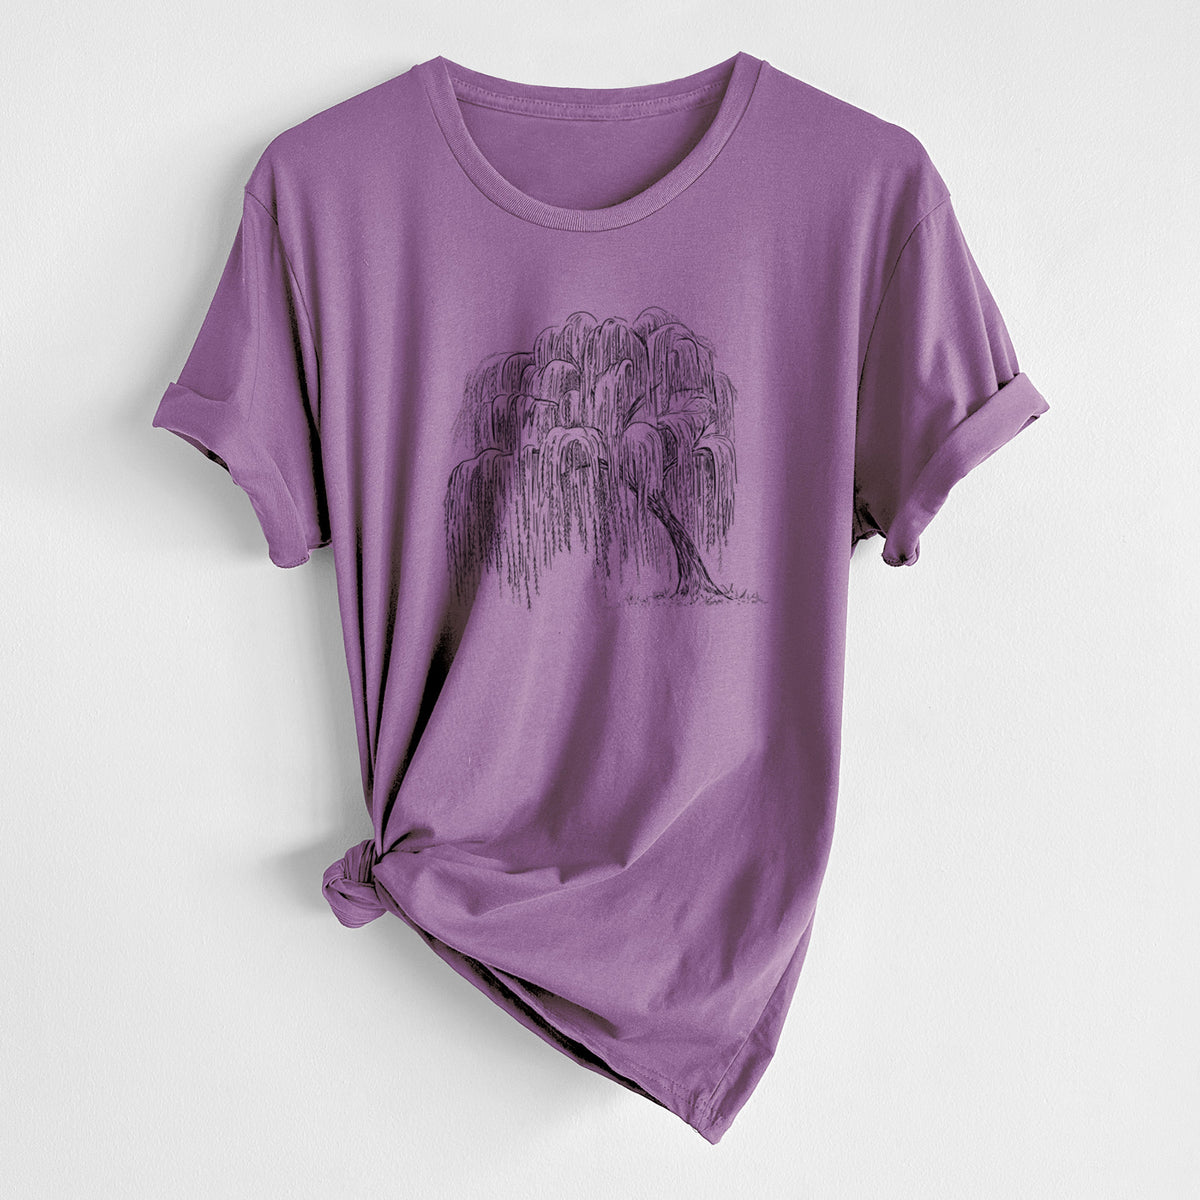 Weeping Willow - Salix babylonica - Unisex Crewneck - Made in USA - 100% Organic Cotton